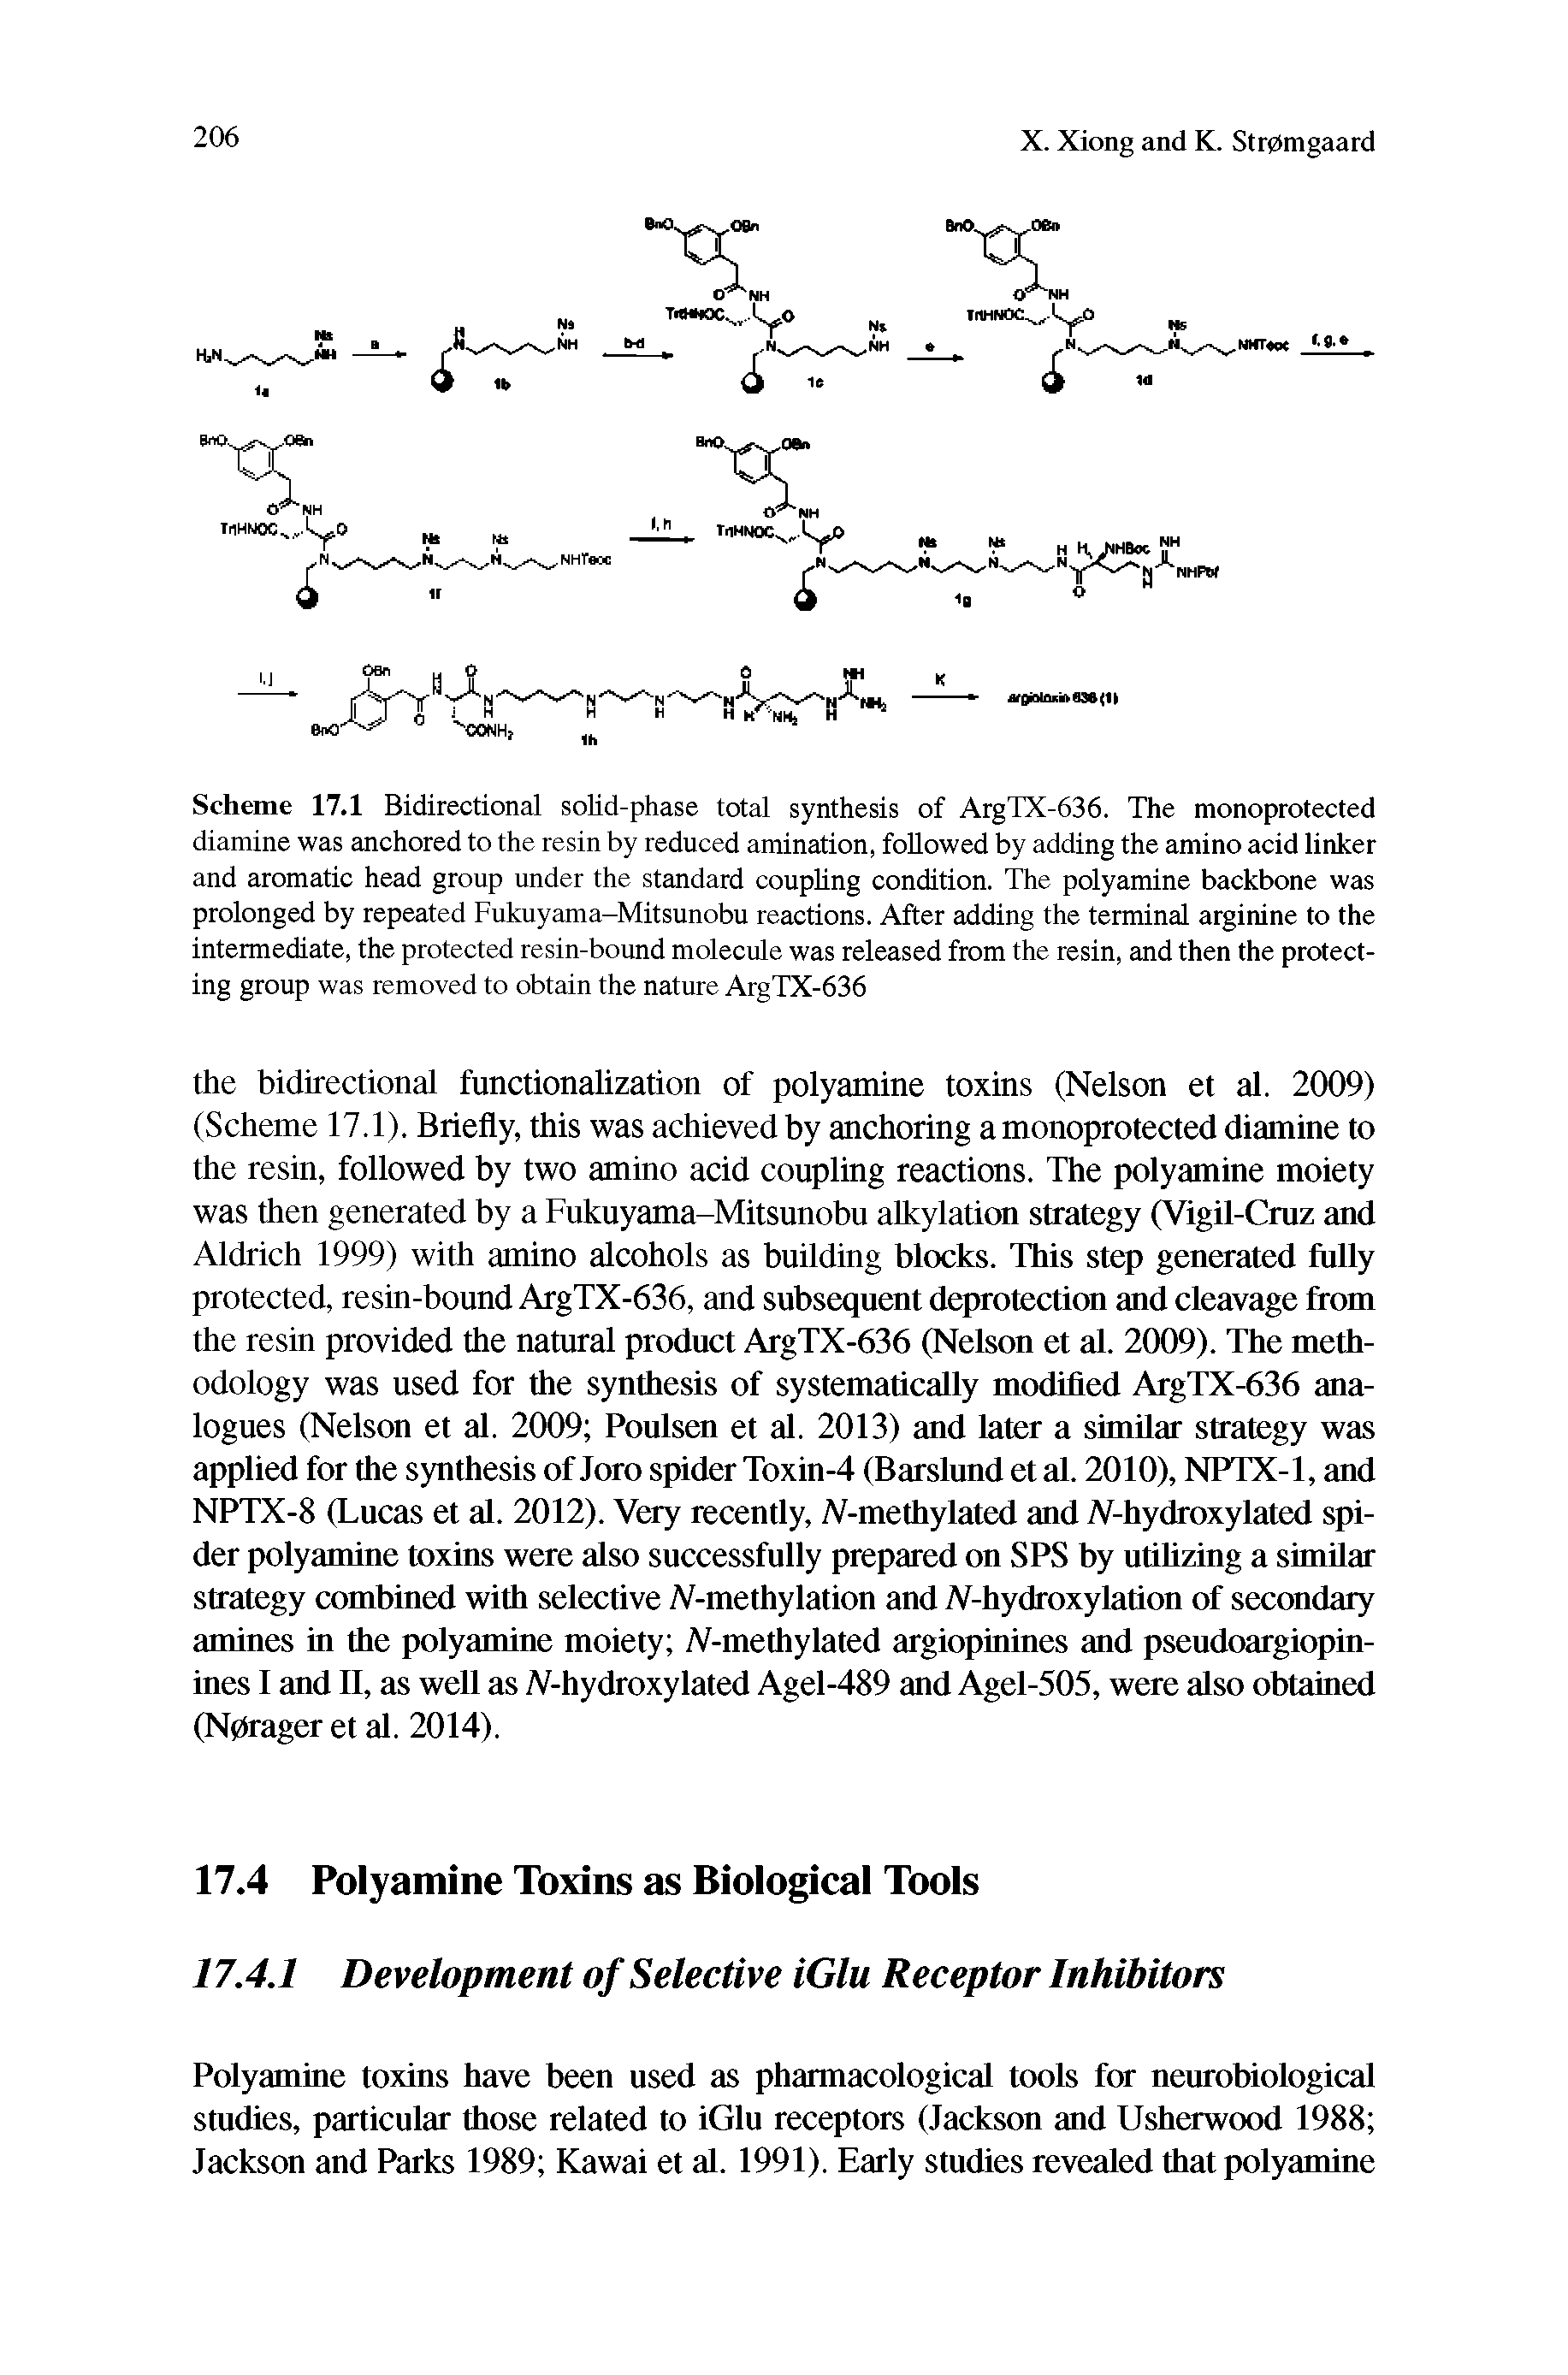 Scheme 17.1 Bidirectional solid-phase total synthesis of AigTX-636. The monoprotected diamine was anchored to the resin by reduced amination, followed by adding the amino acid linker and aromatic head group under the standard coupling condition. The polyamine backbone was prolonged by repeated Fukuyama-Mitsunobu reactions. After adding the terminal arginine to the intermediate, the protected resin-bound molecule was released from the resin, and then the protecting group was removed to obtain the nature ArgTX-636...